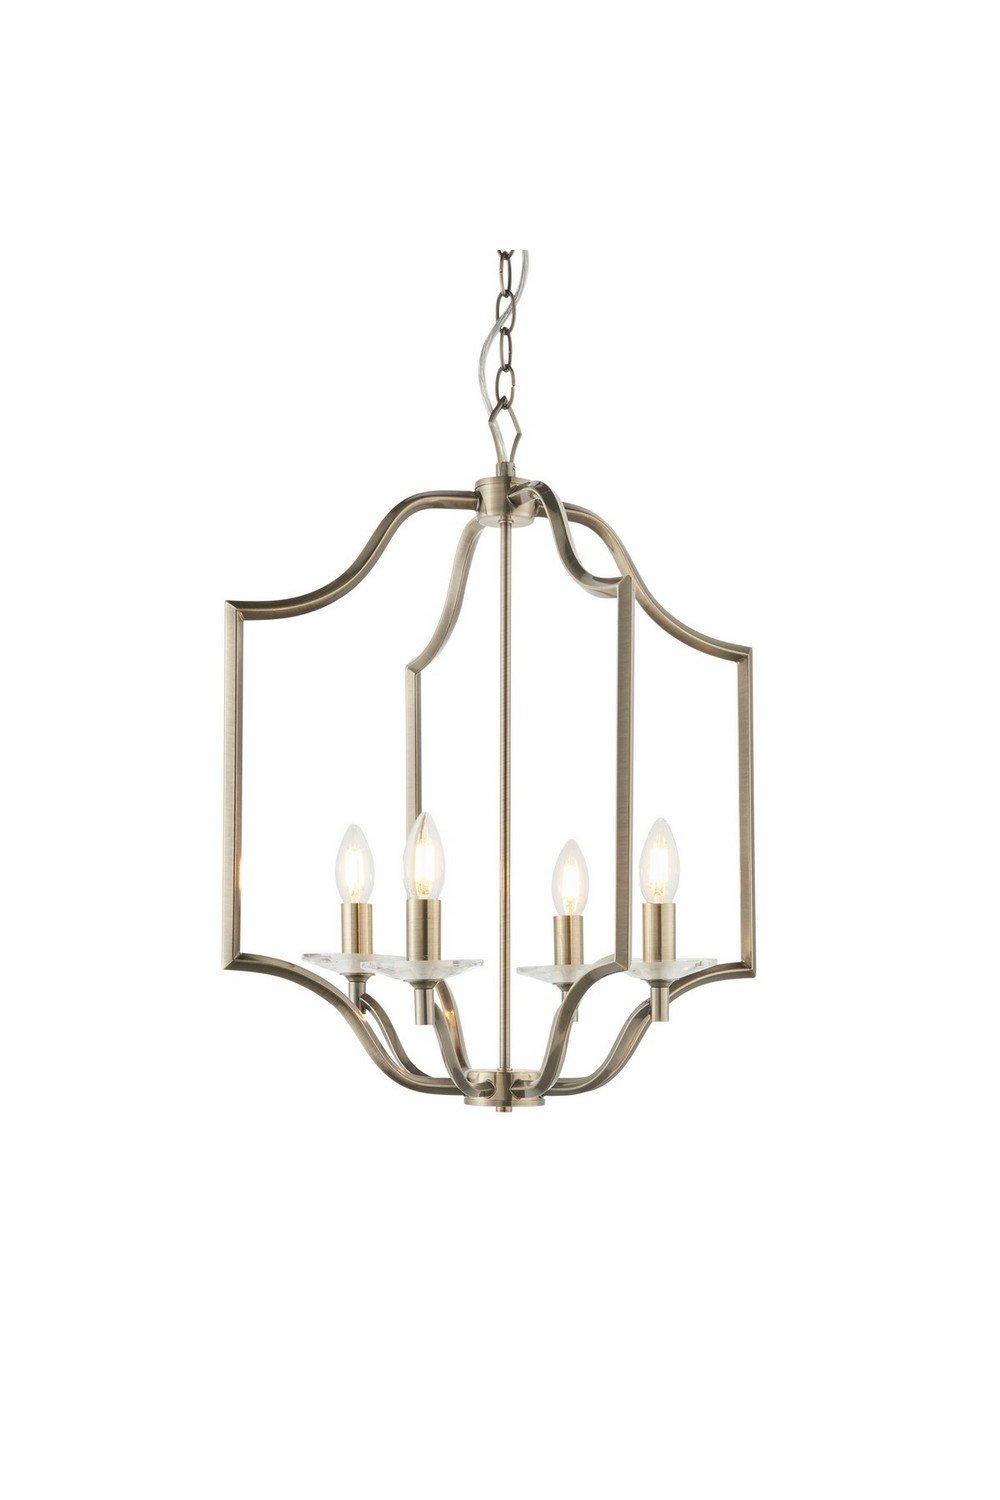 Lainey 4 Light Ceiling Pendant Antique Brass Plate & Clear Crystal Glass E14